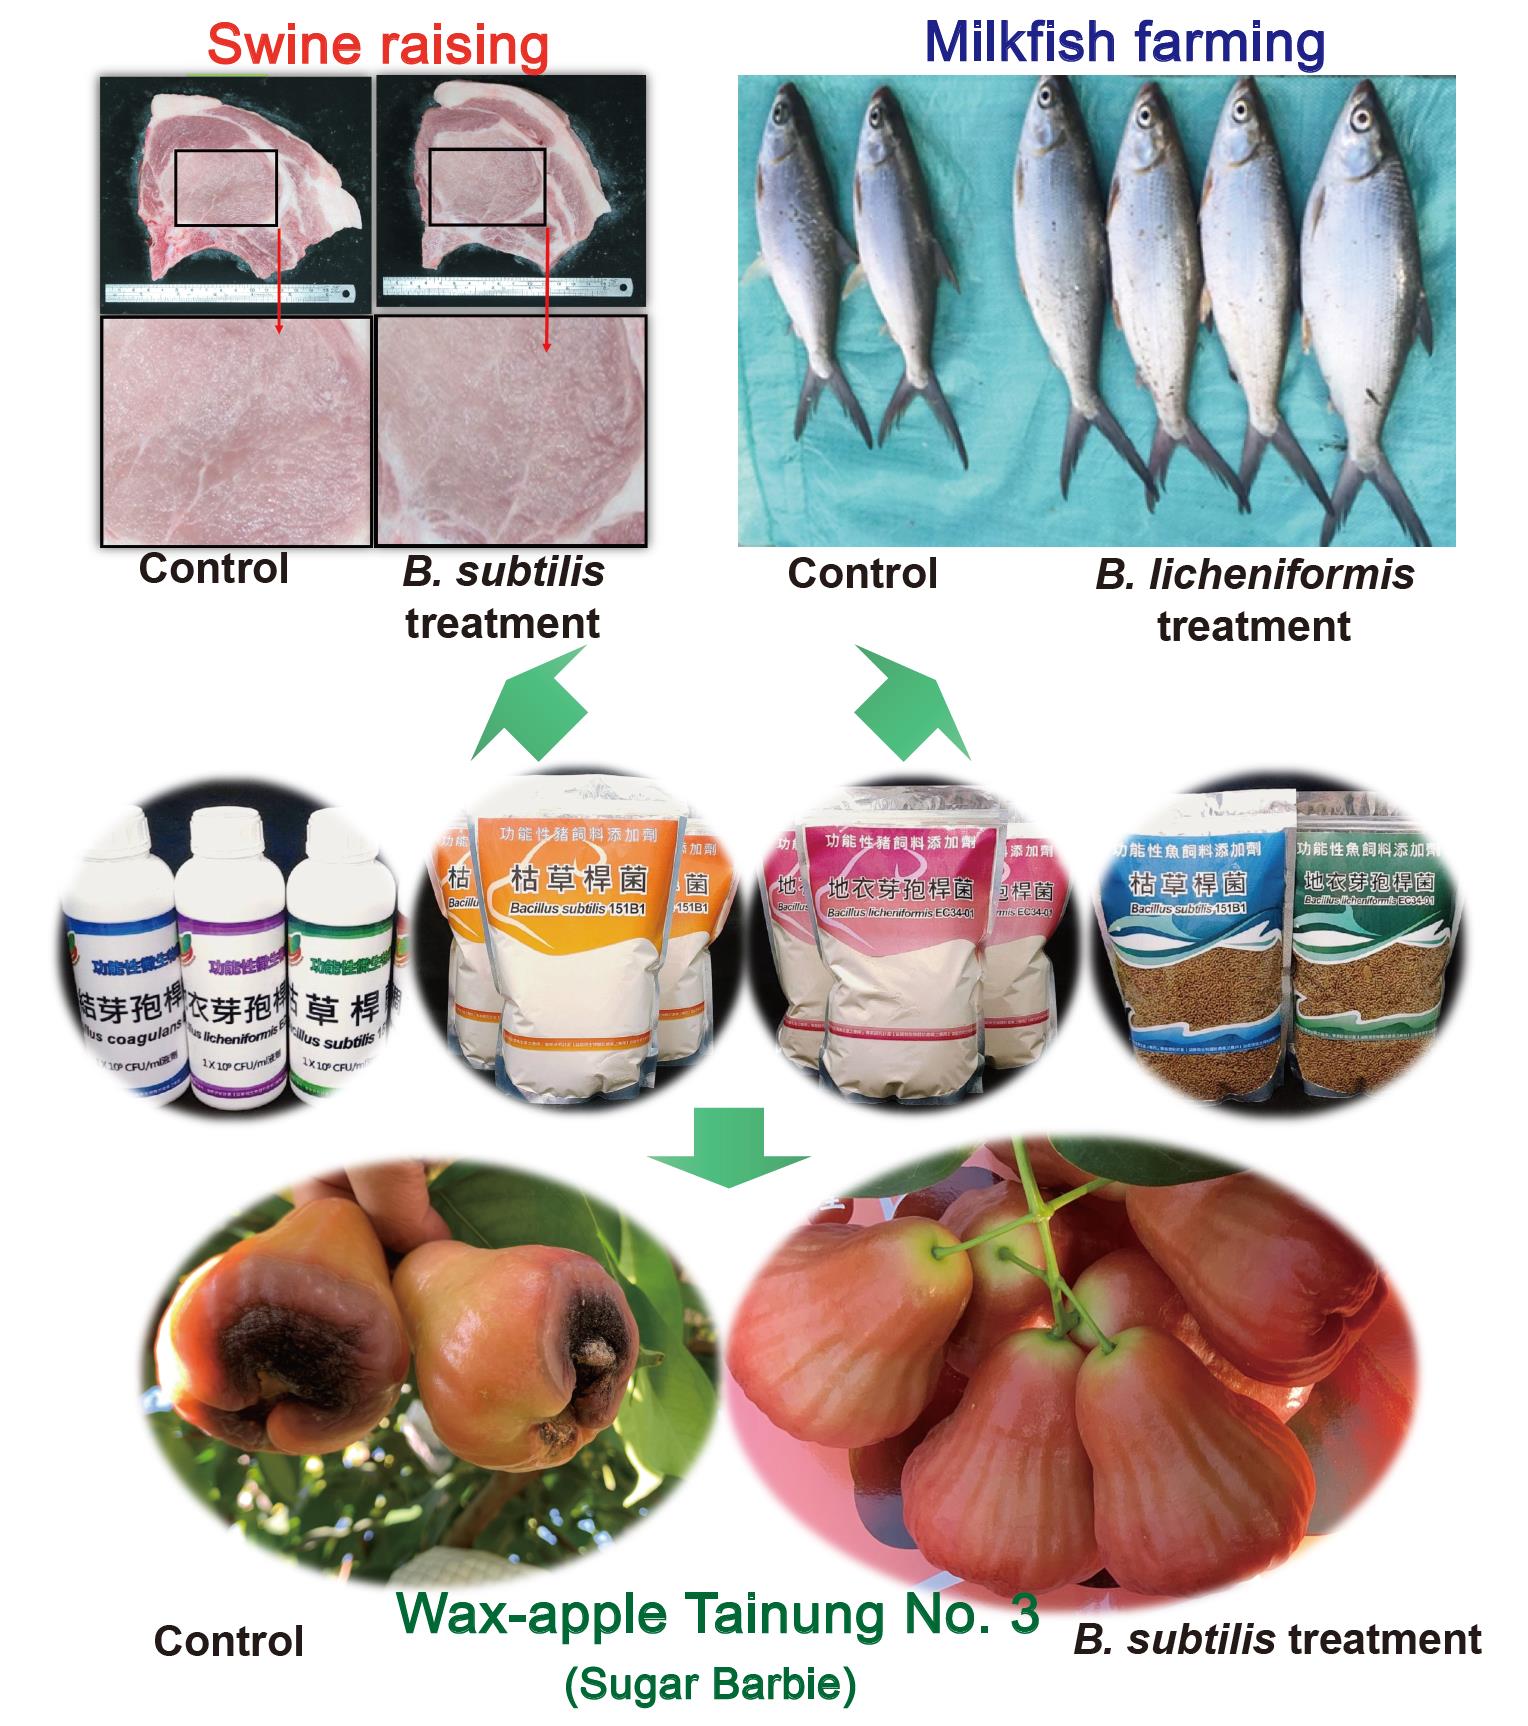 Fig.2. Multi-industry applications of Bacillus subtilis and Bacillus licheniformis based on probiotic products. The probiotic products can be used in crop health care, and in the livestock and aquaculture industries. B. subtilis can protect the wax apple cultivar Tainung no. 3 from fruit rot disease, withstand chilling injury, and improve fruit quality and yield; when applied in swine raising, it can also improve the quality of pork tenderloin, increase the proportion of lean meat, and increase the water holding capacity of the meat when cooking. The application of B. licheniformis can also accelerate the growth of milkfish, and improve the fillet recovery rate.